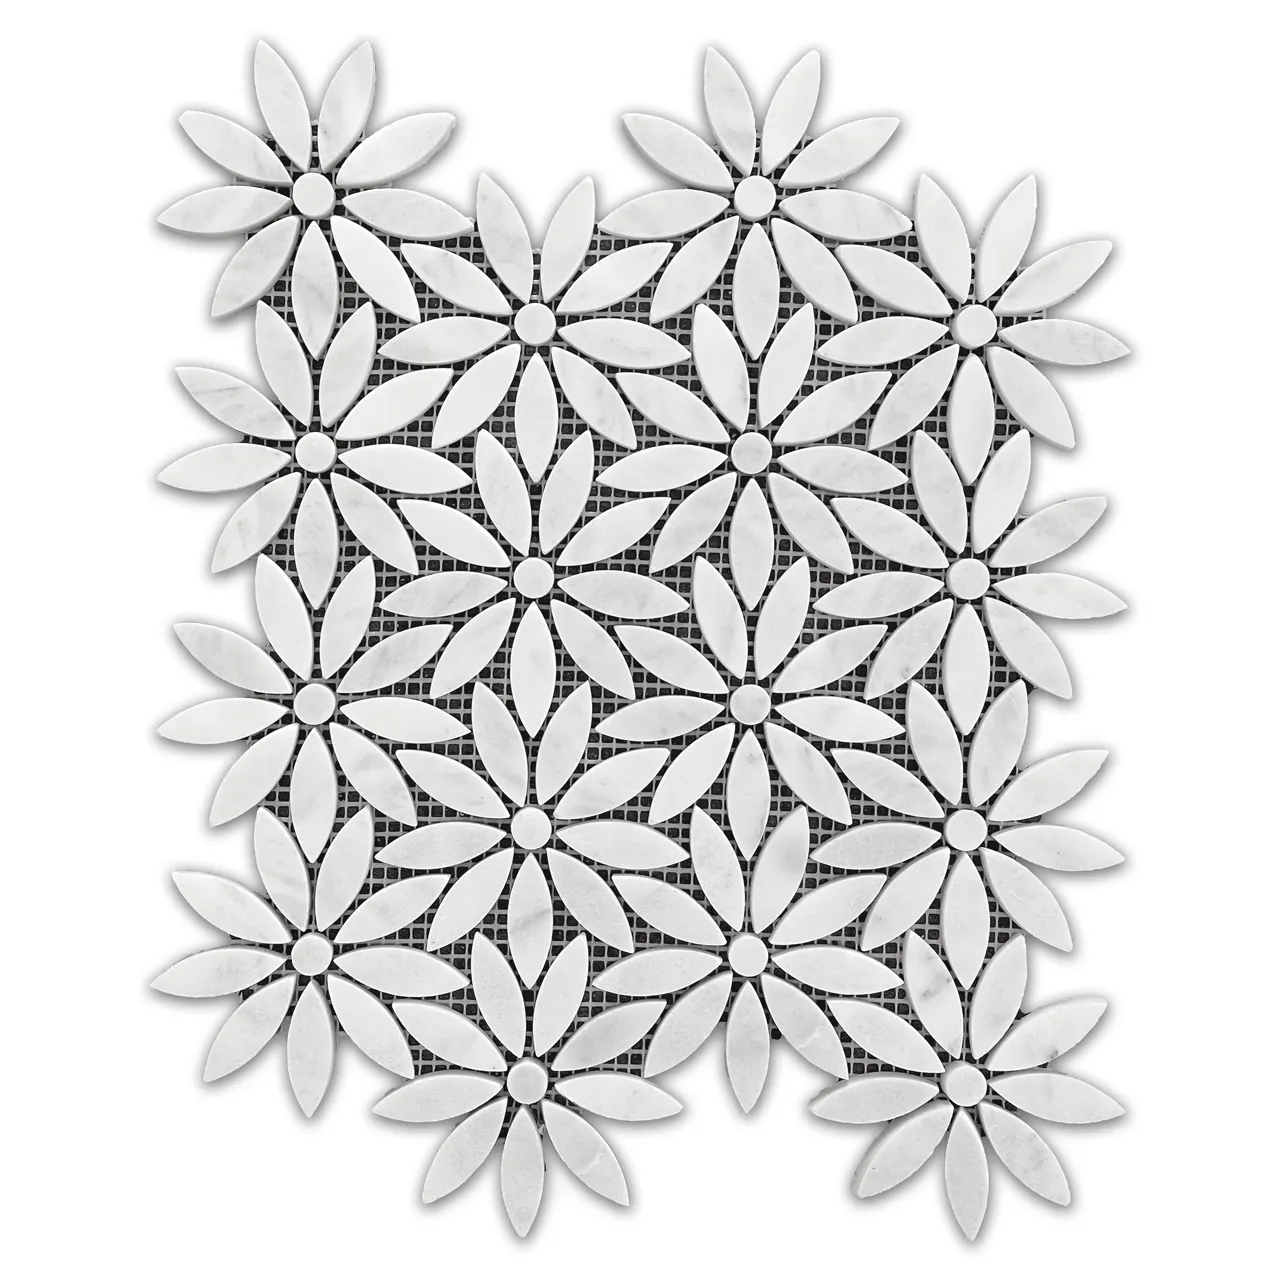 Carrara White Marble With Carrara White Accent Daisy Flower Waterjet Mosaic Tile Polished